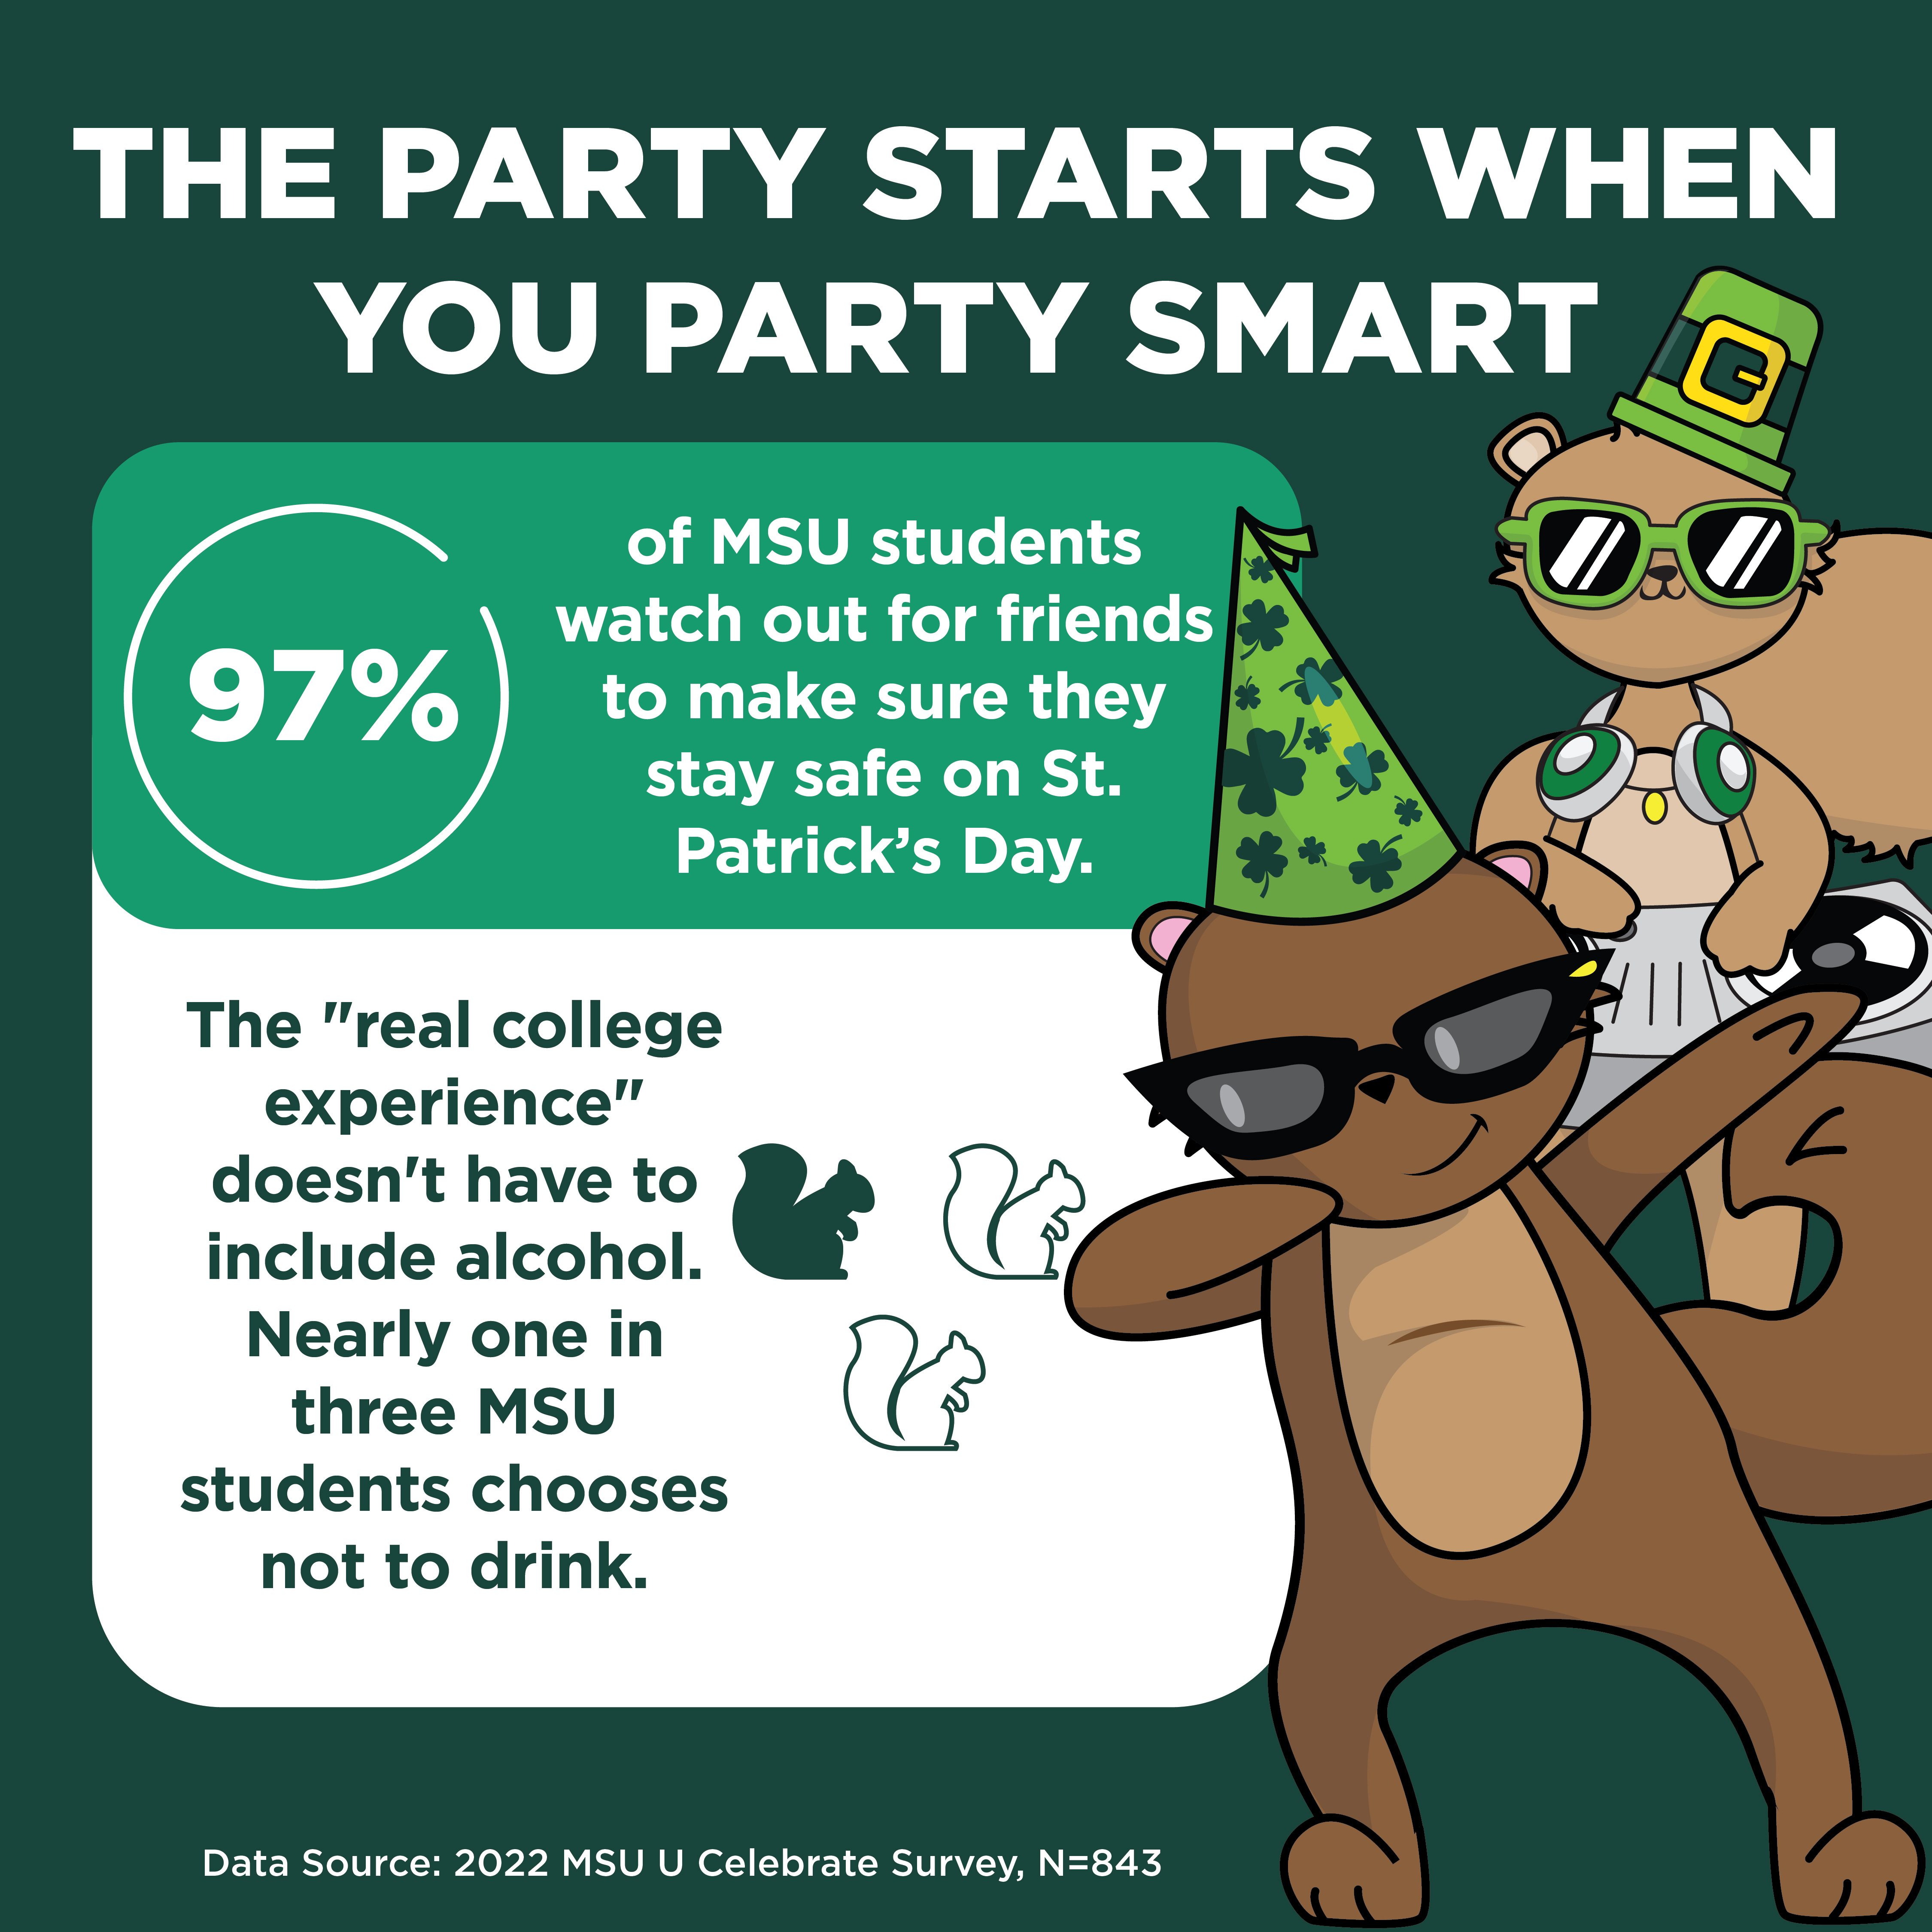 Illustration of two squirrels, one is dancing and the other is behind him operating a DJ booth. Green background with white text that reads "The party Starts When you party smart 97% of MSU students watch out for friends to make sure they stay safe on St. Patrick’s Day. The "real college experience" doesn't have to include alcohol. 32% of MSU students chose not to drink at all in the last 30 days. Data Source: 2022 MSU U Celebrate Survey, N=843"